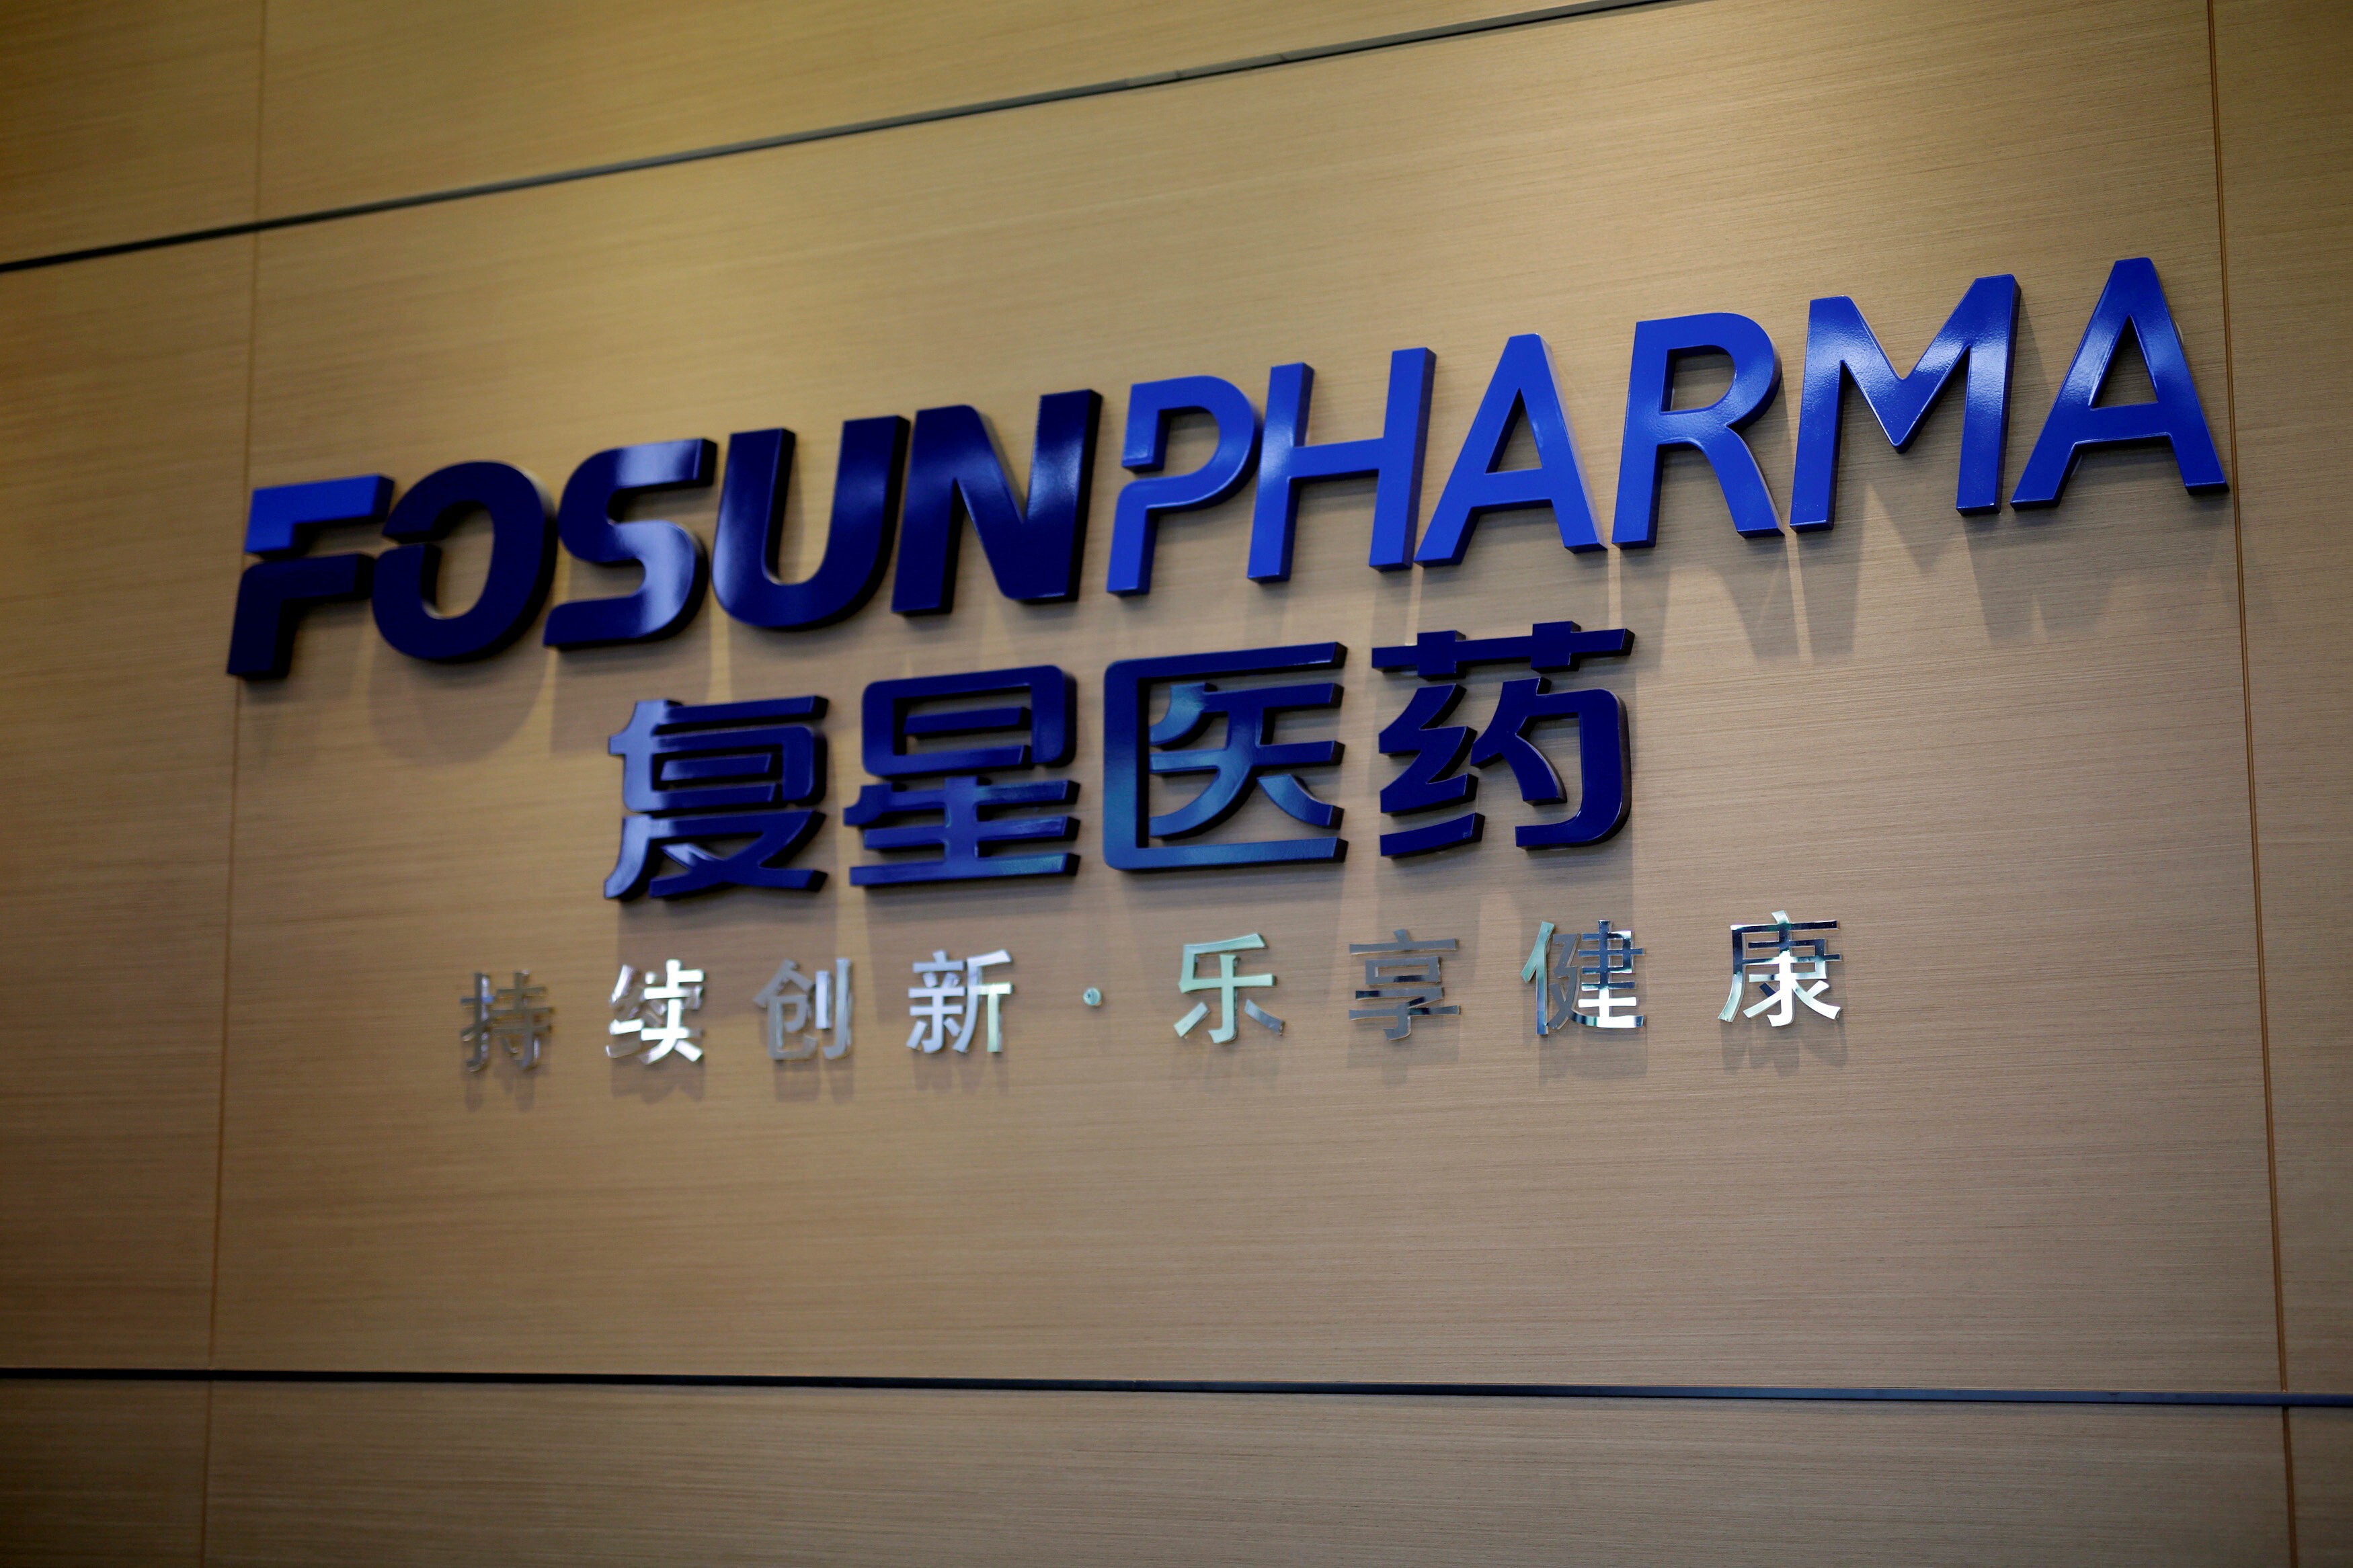 Fosun Pharmaceutical obtained the licence from BioNTech to exclusively develop and commercialise BioNTech’s mRNA Covid-19 vaccine products in mainland China, Hong Kong, Macau and Taiwan, in March this year. Photo: Reuters